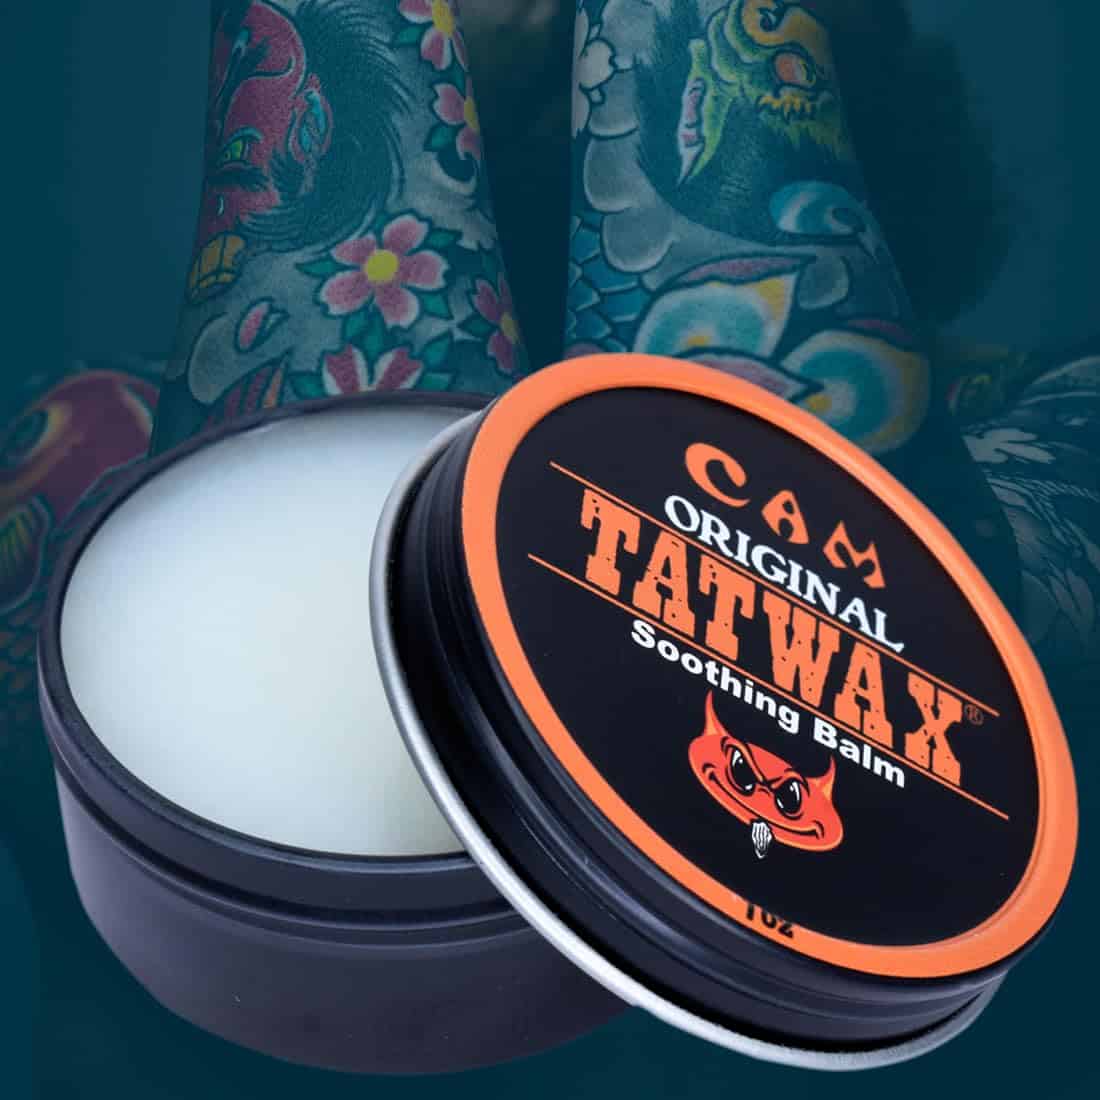 Tattoo Soothing Balm